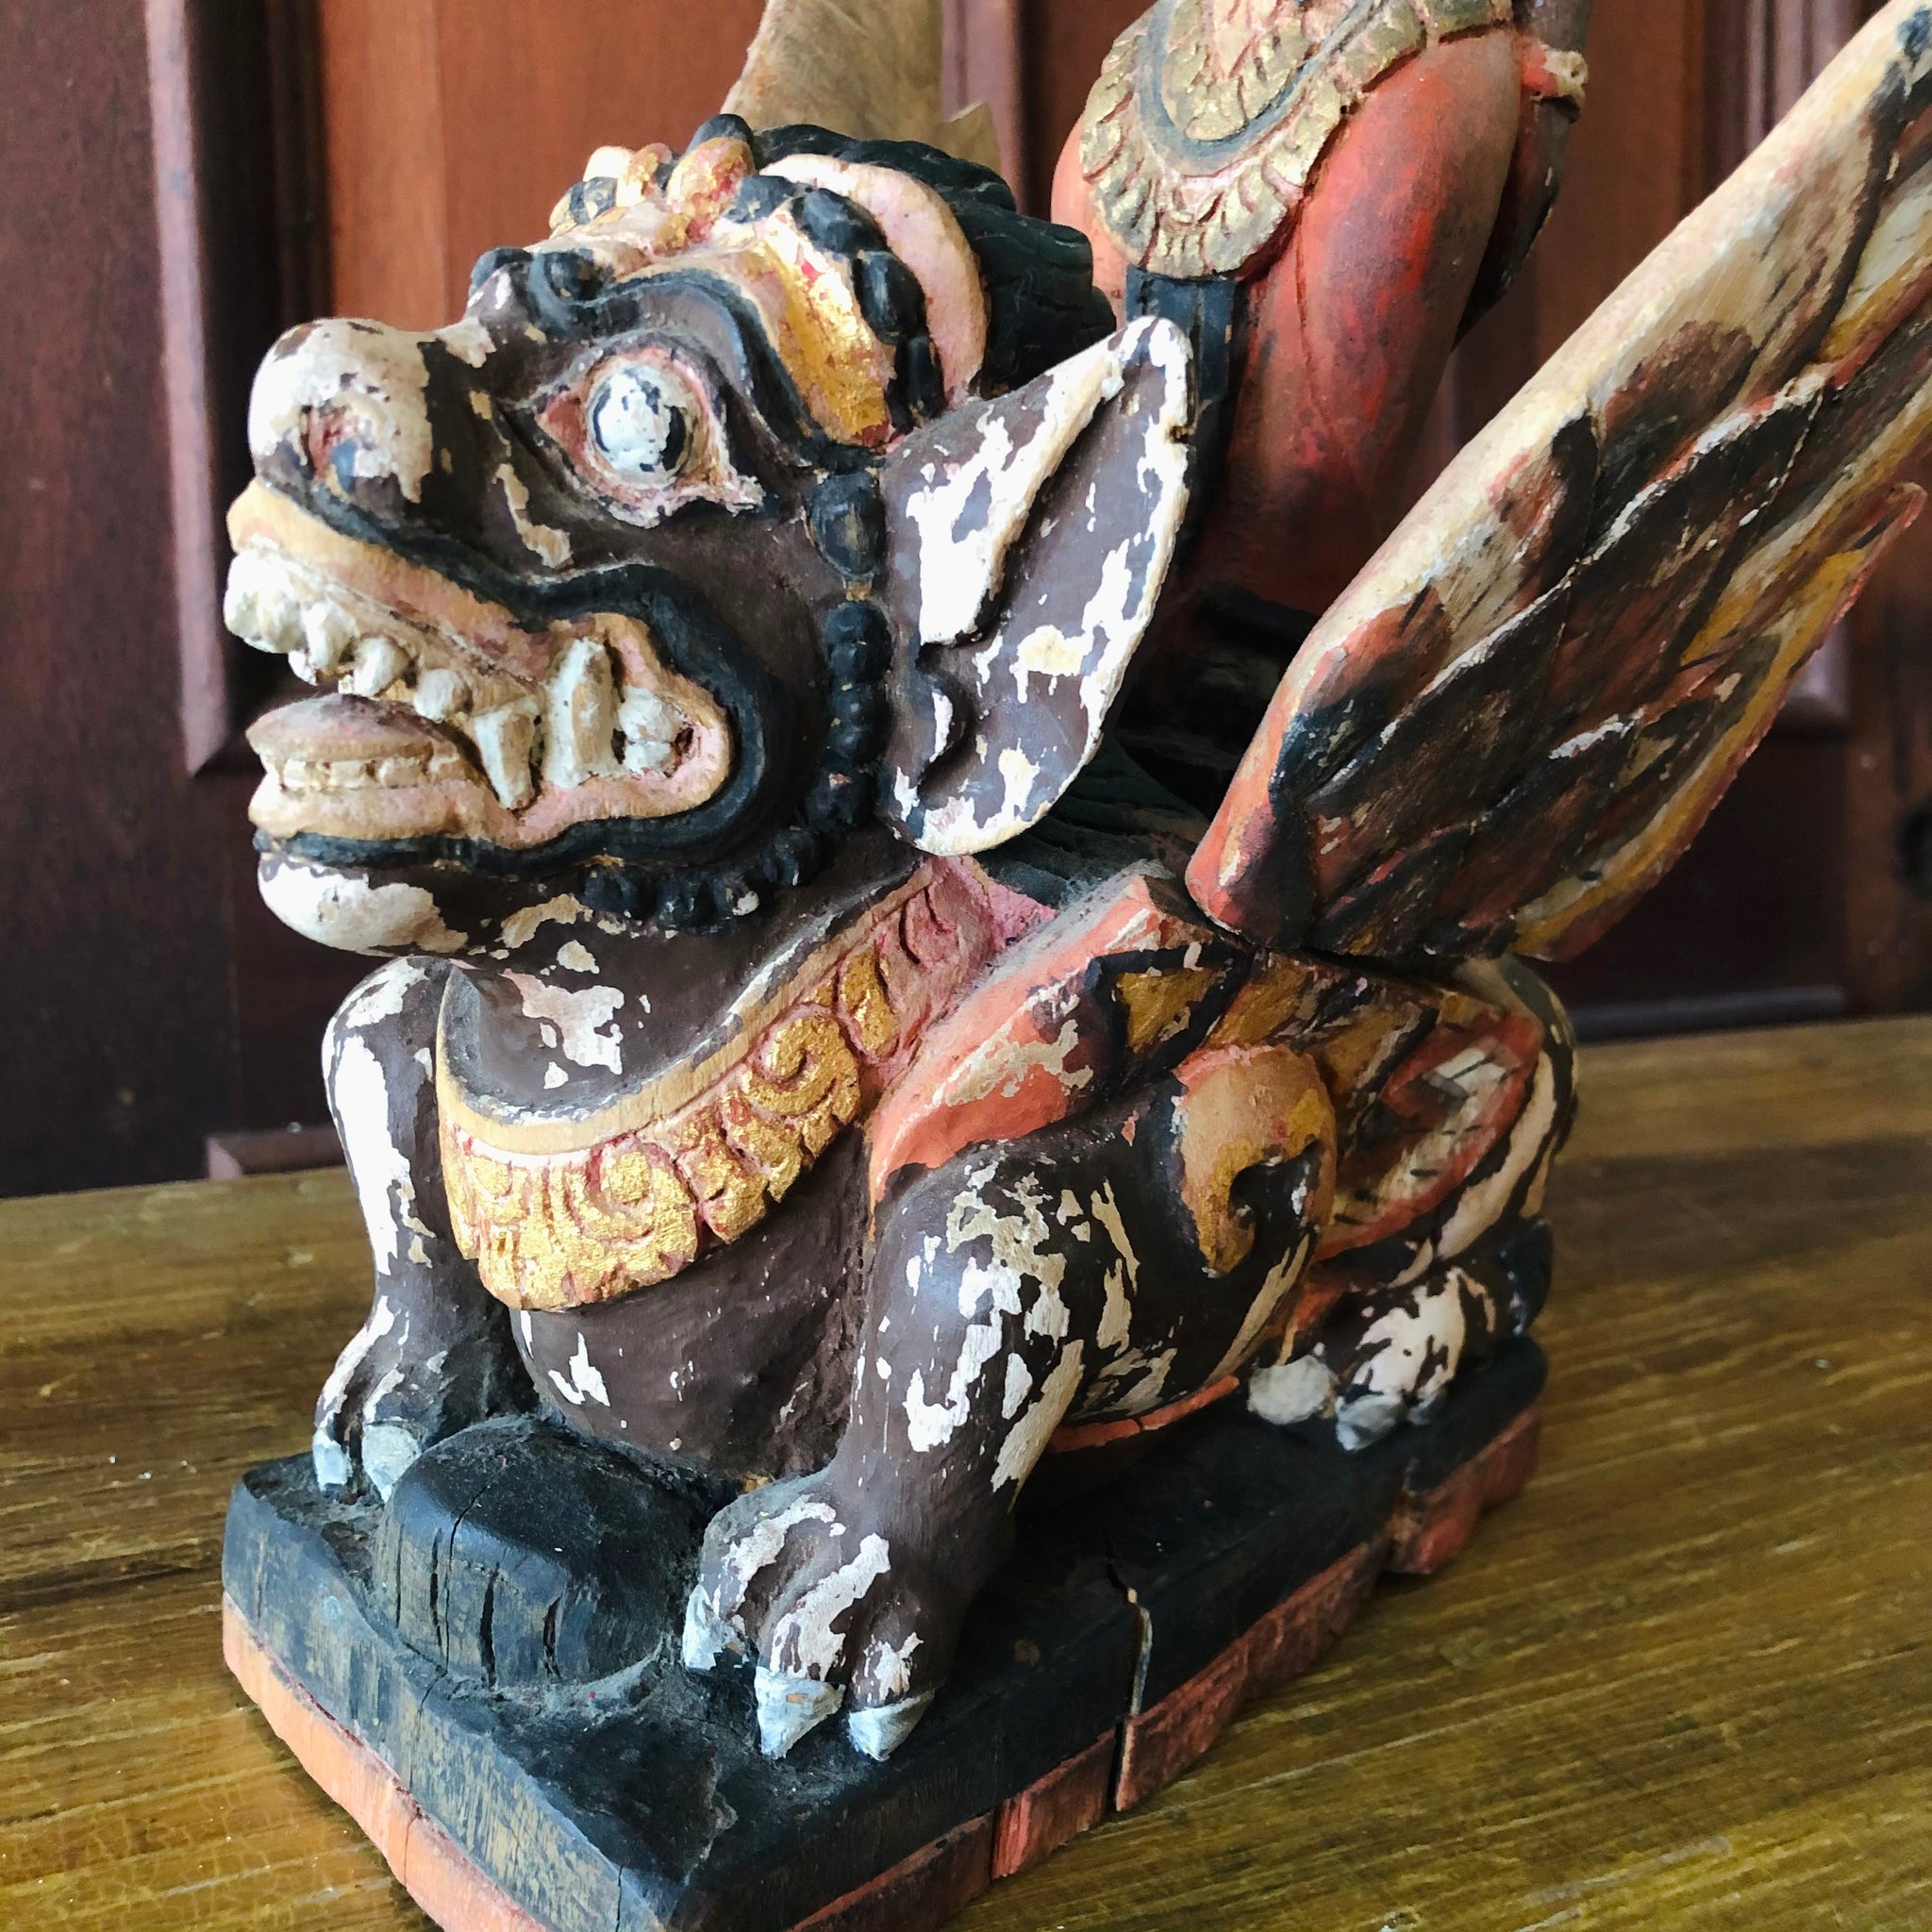 Carved Wood Dragon Statue from Bali